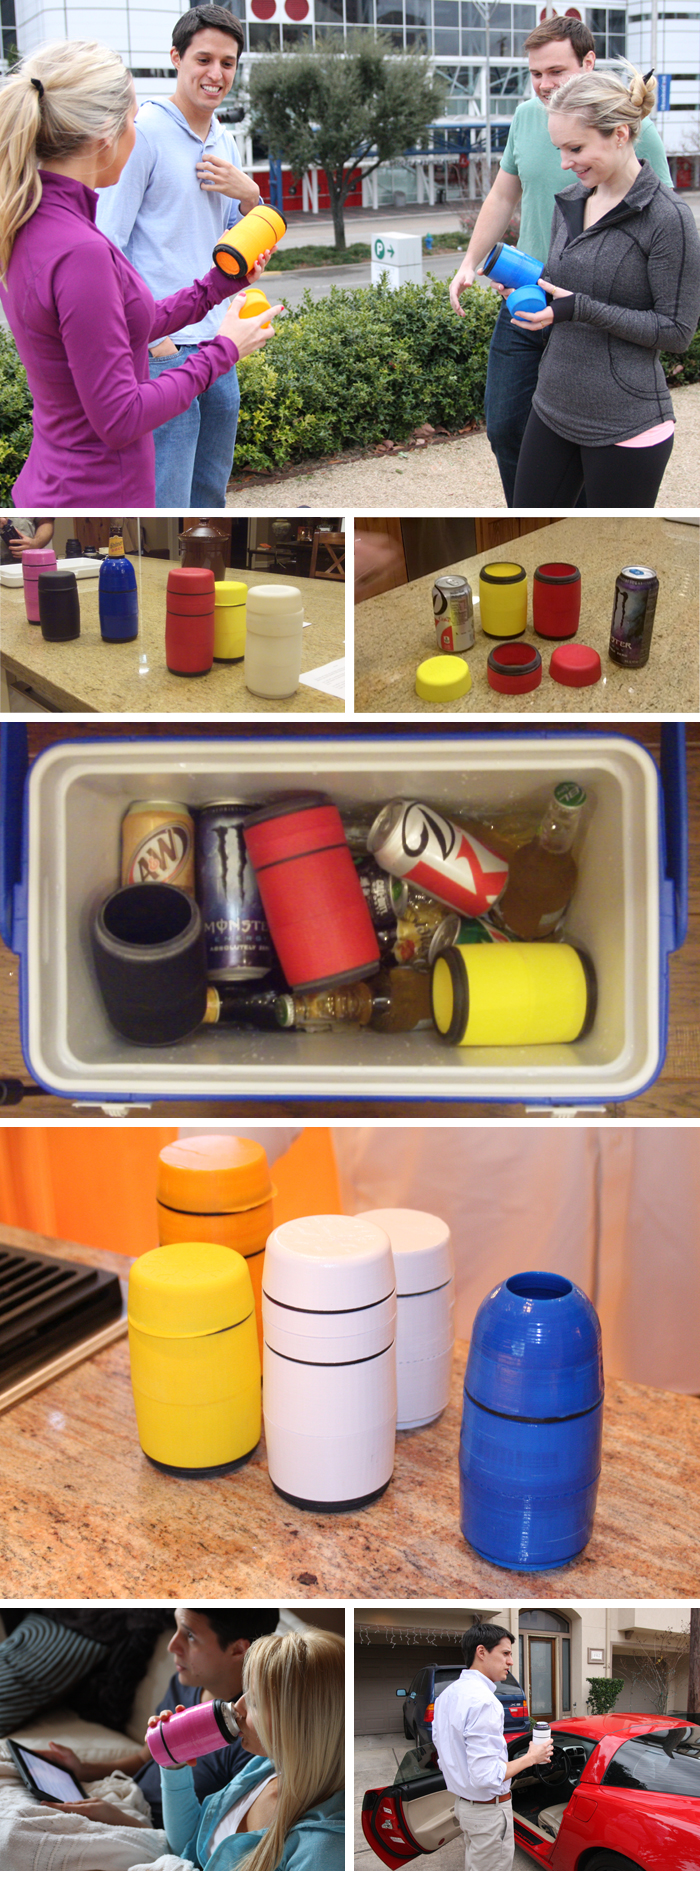 ColdCan prototypes being used.